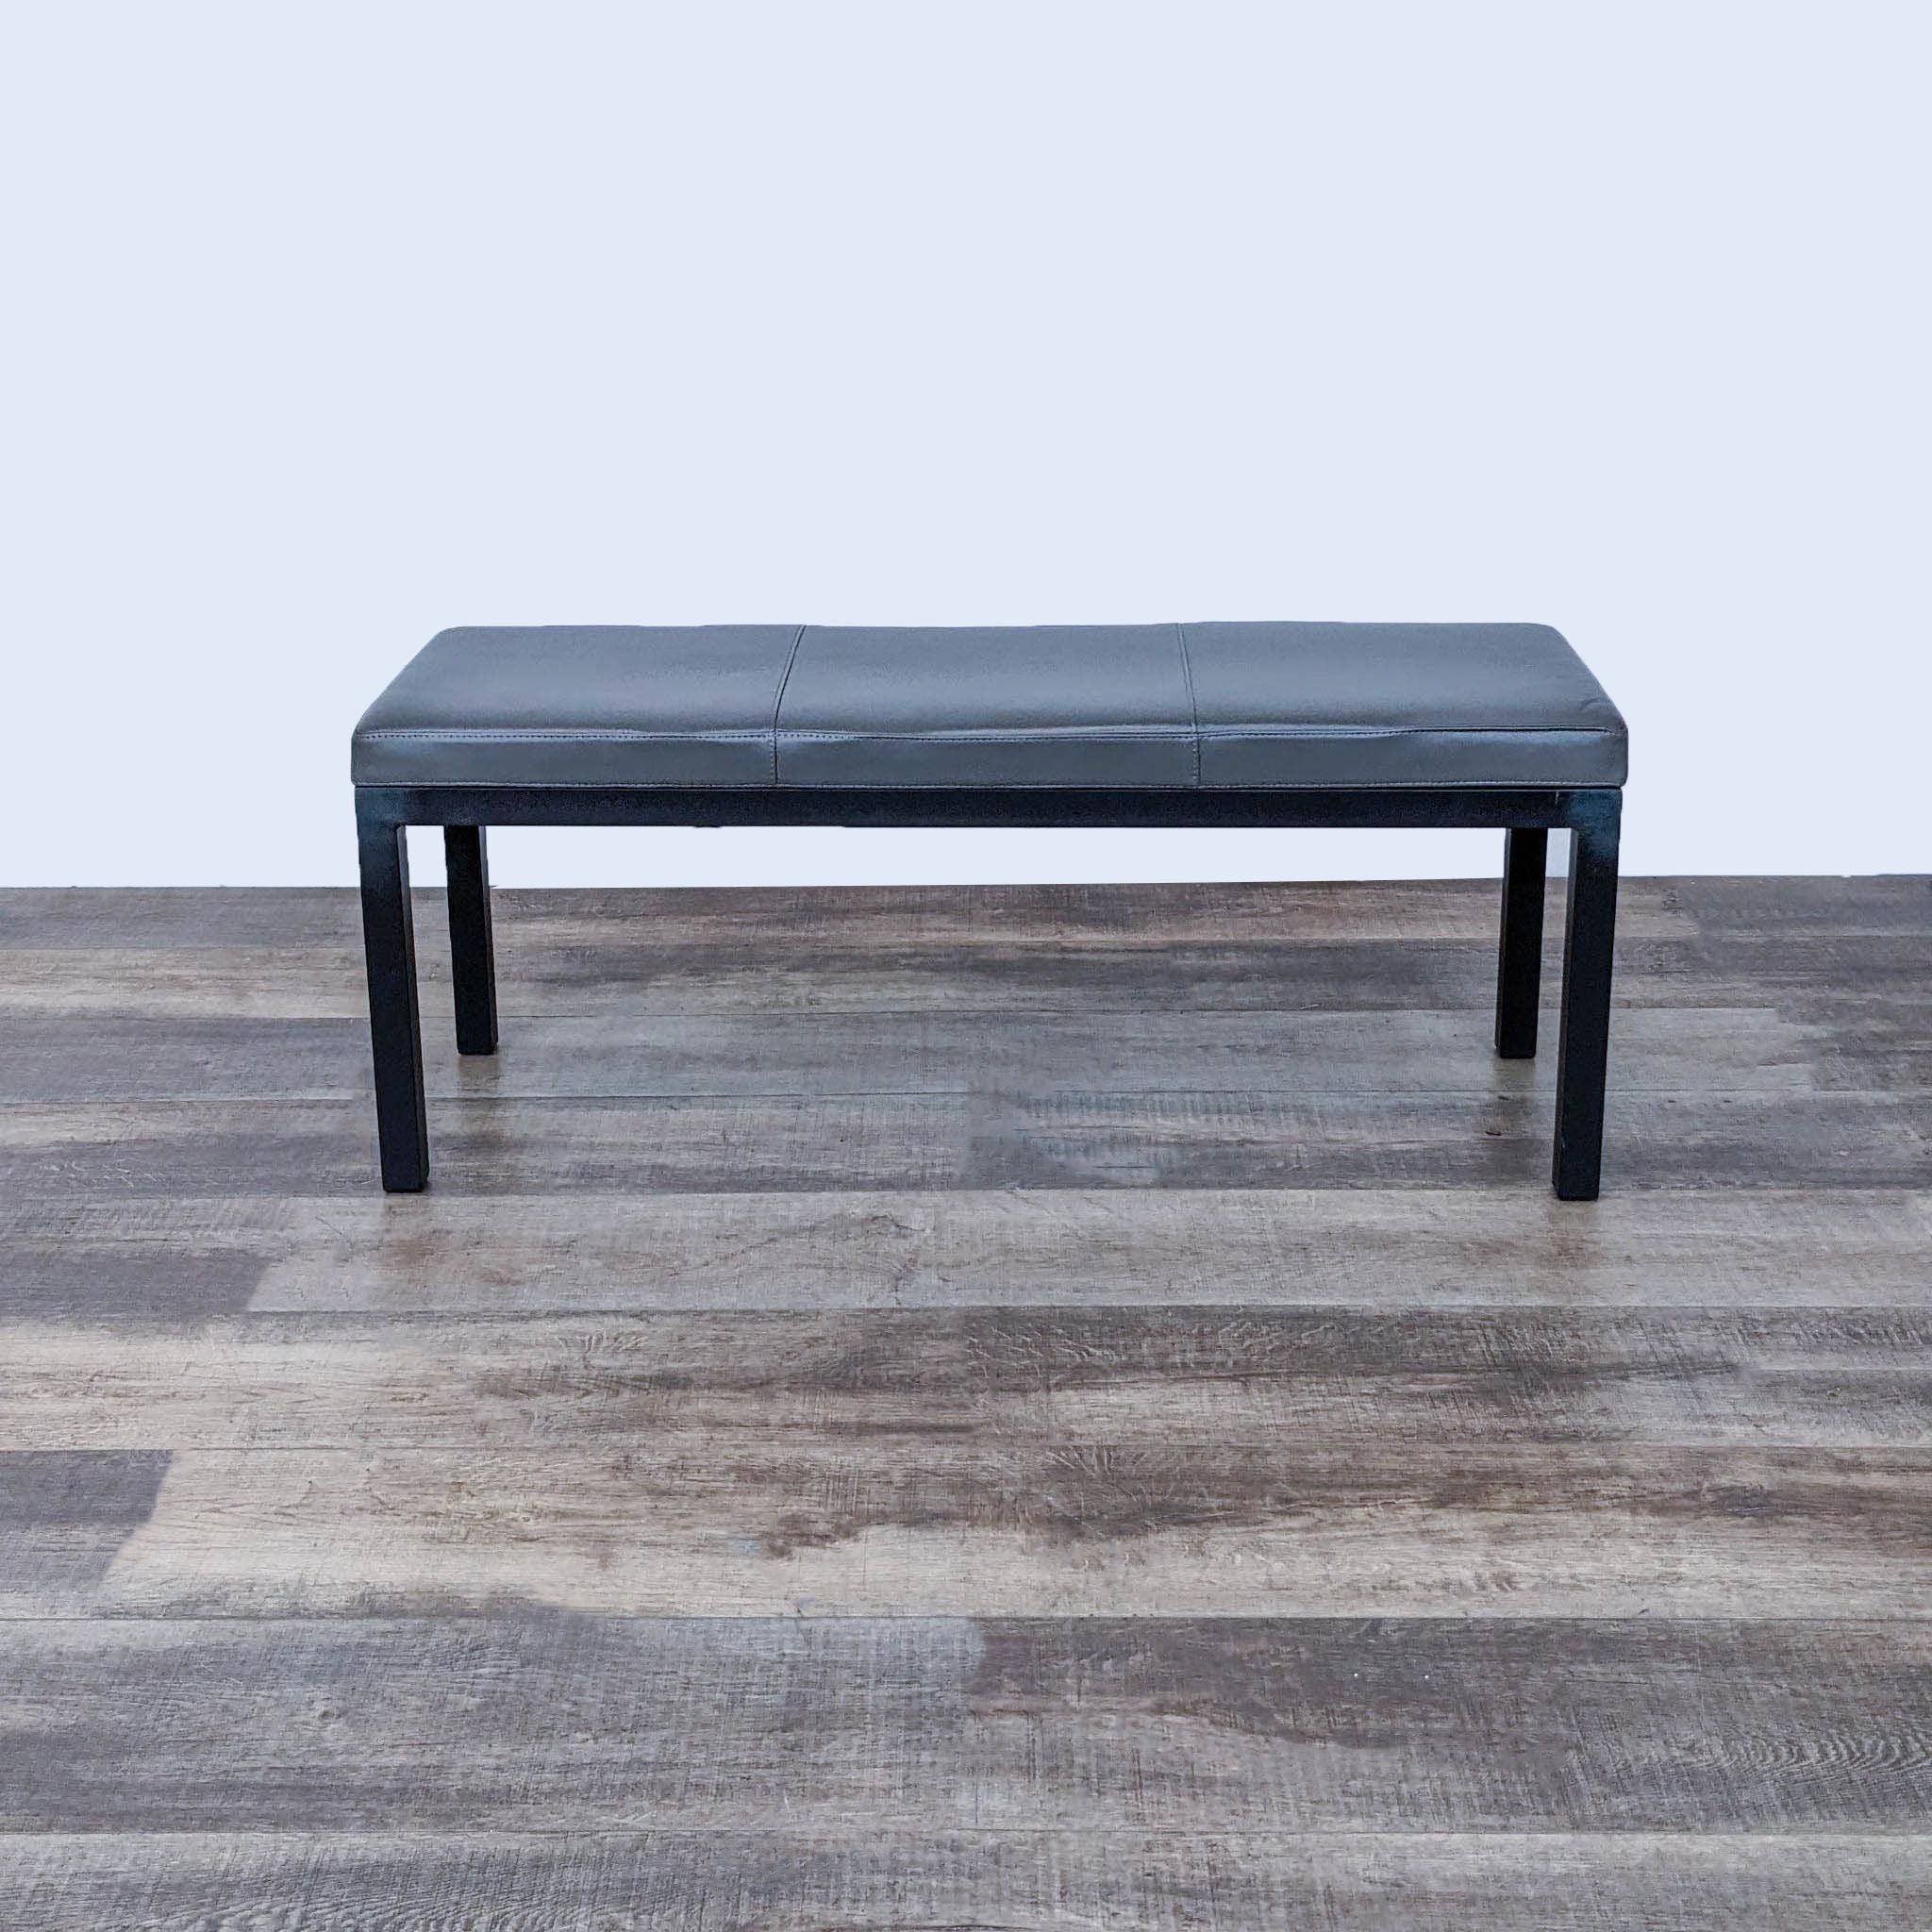 Reperch solid wood frame bench with a neutral padded seat on a wooden floor.